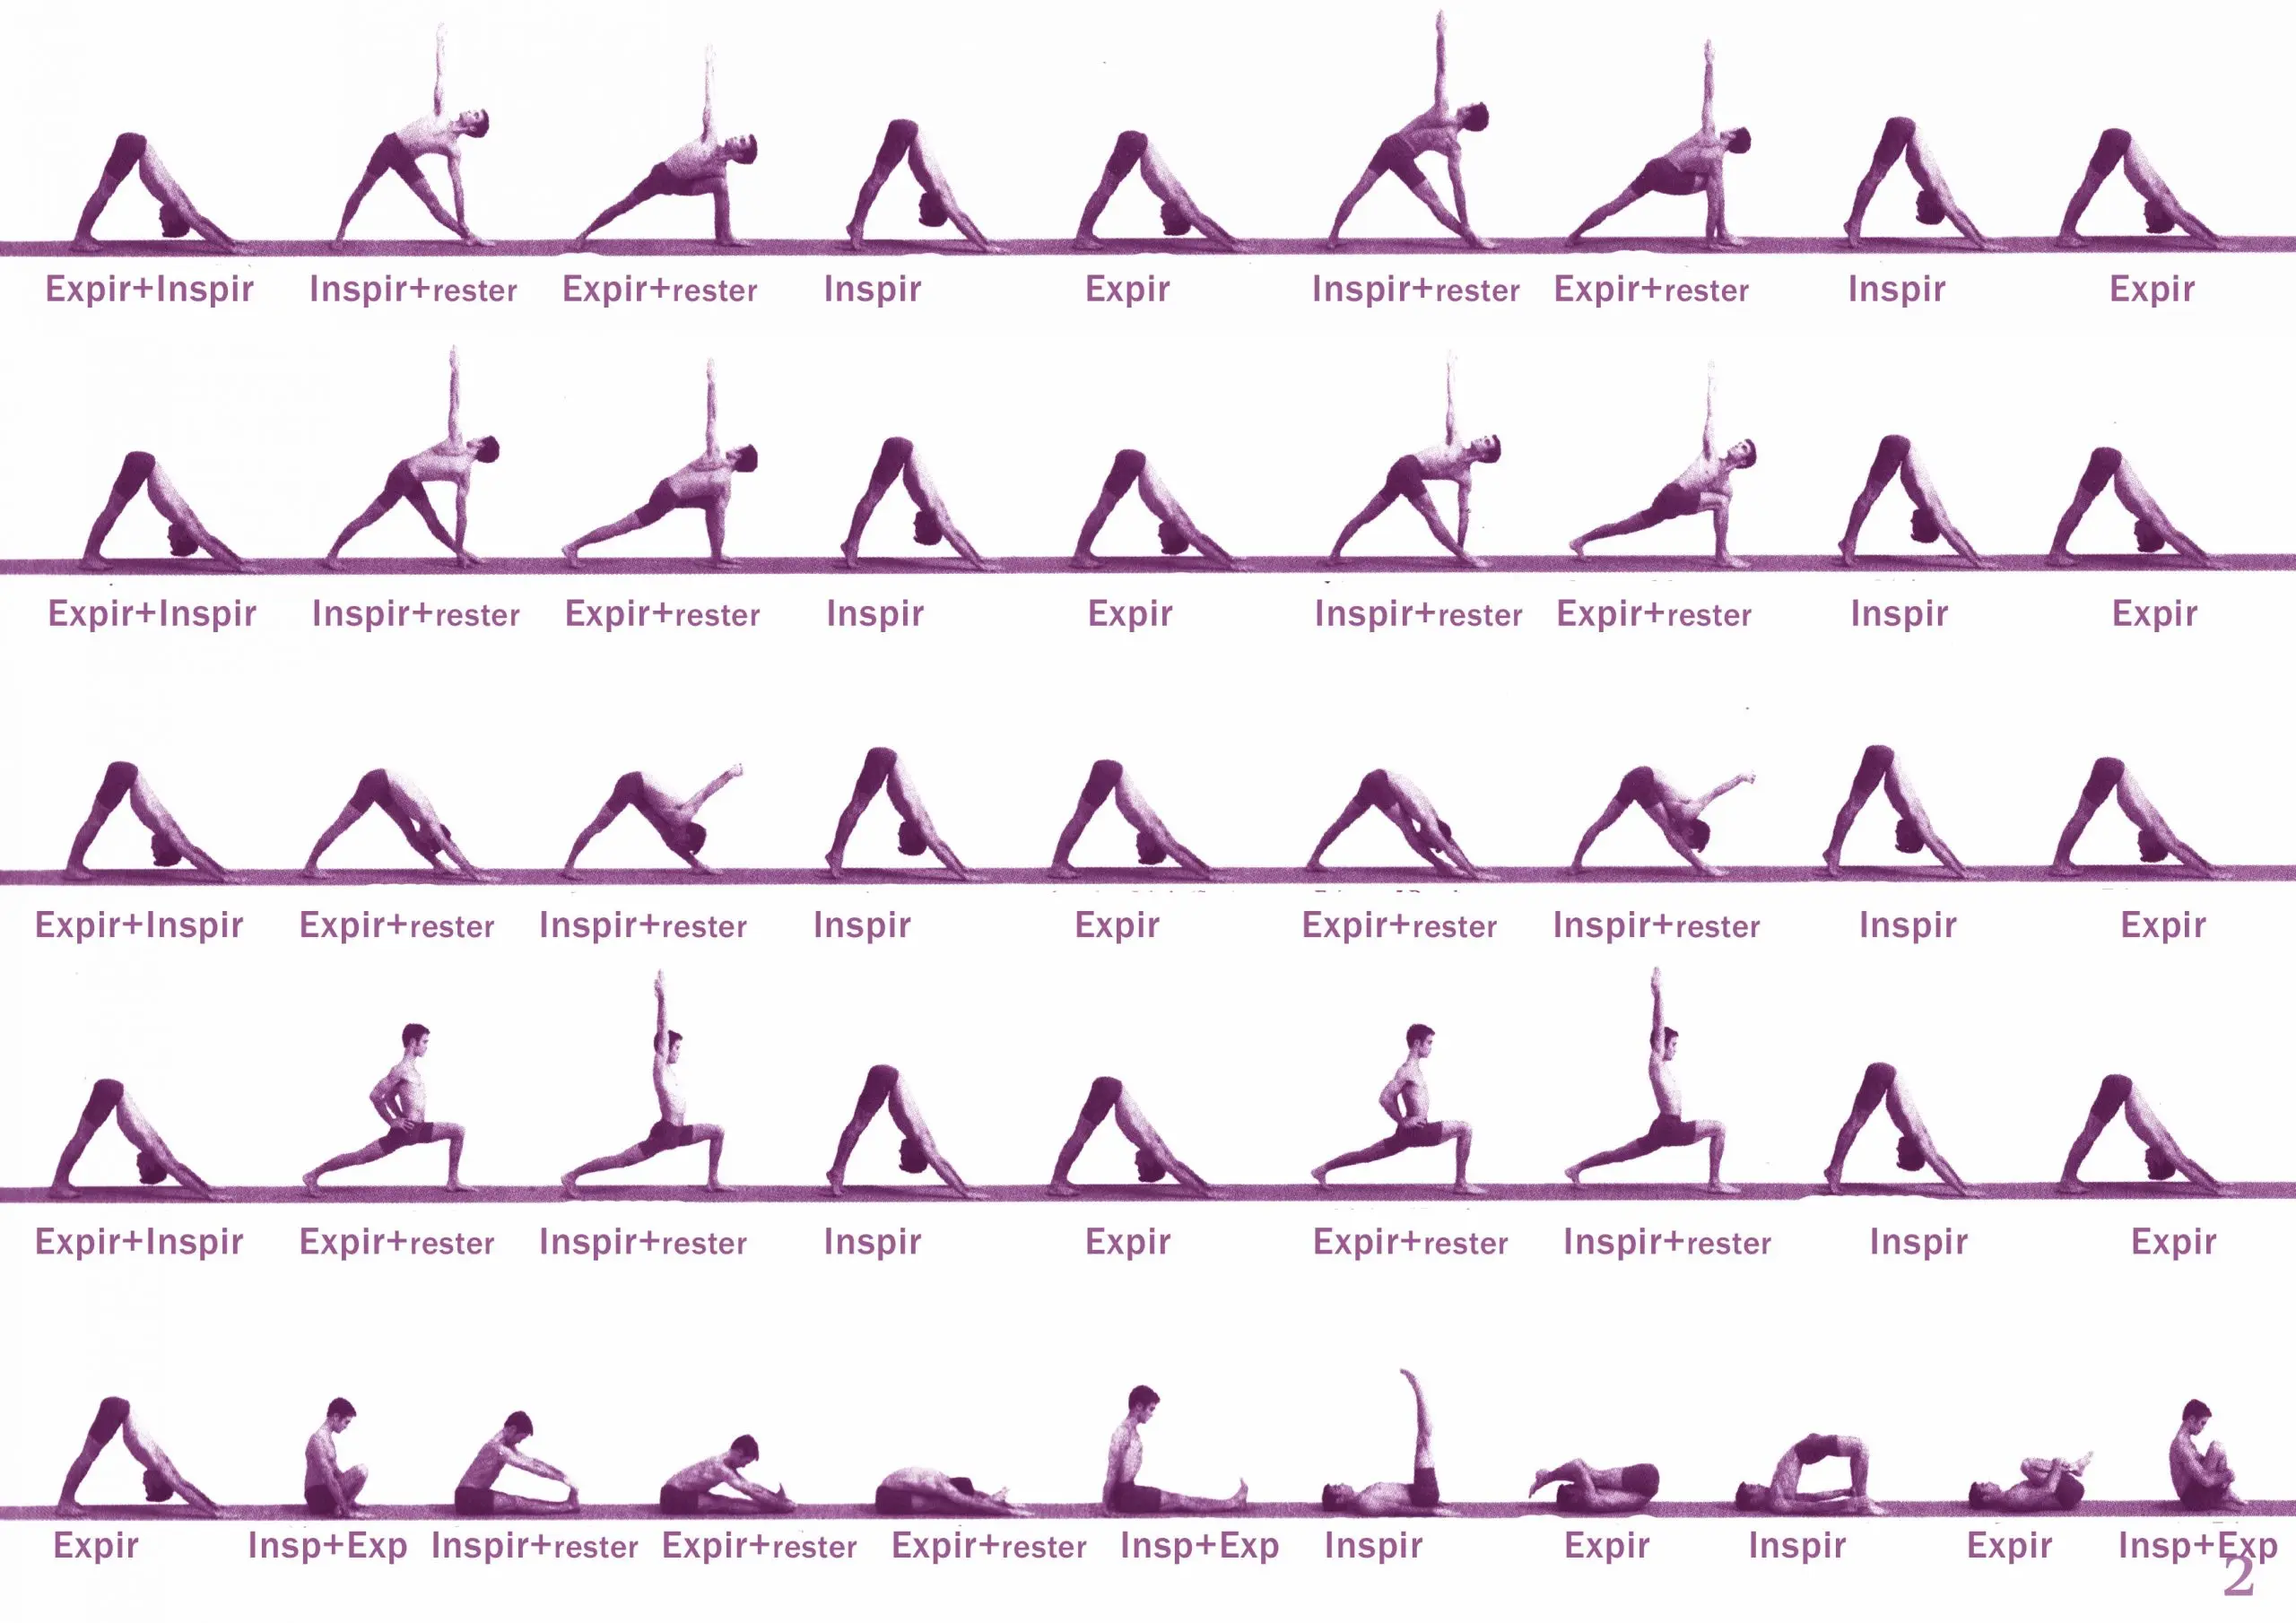 vinyasa krama yoga sequence - What is the sequence of the vinyasa flow